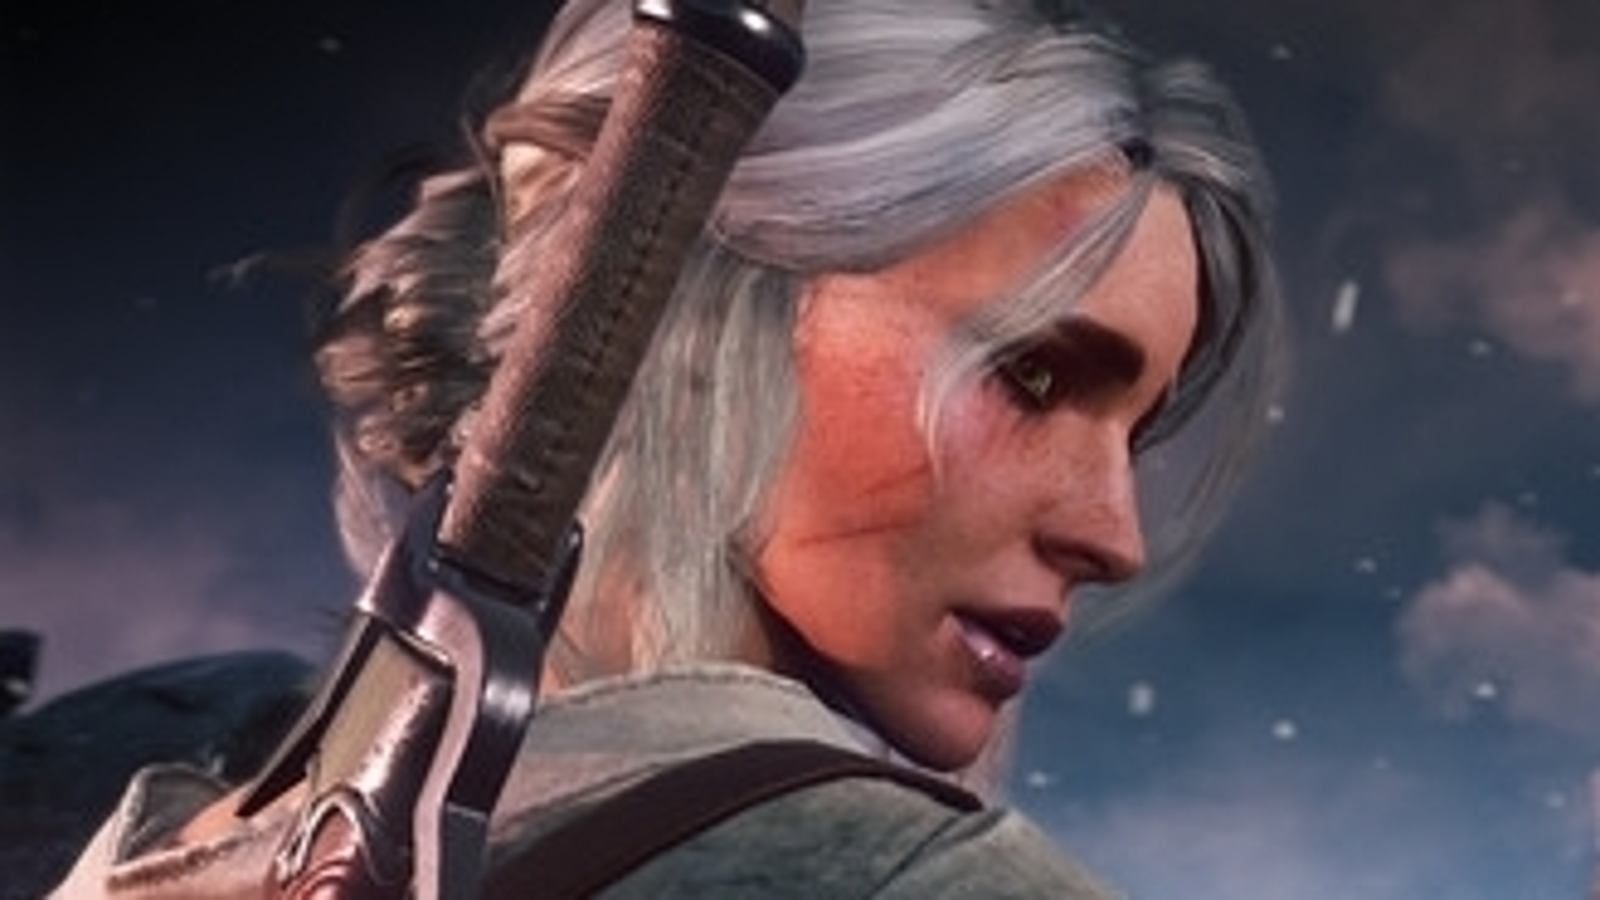 King's Gambit, Witcher Wiki